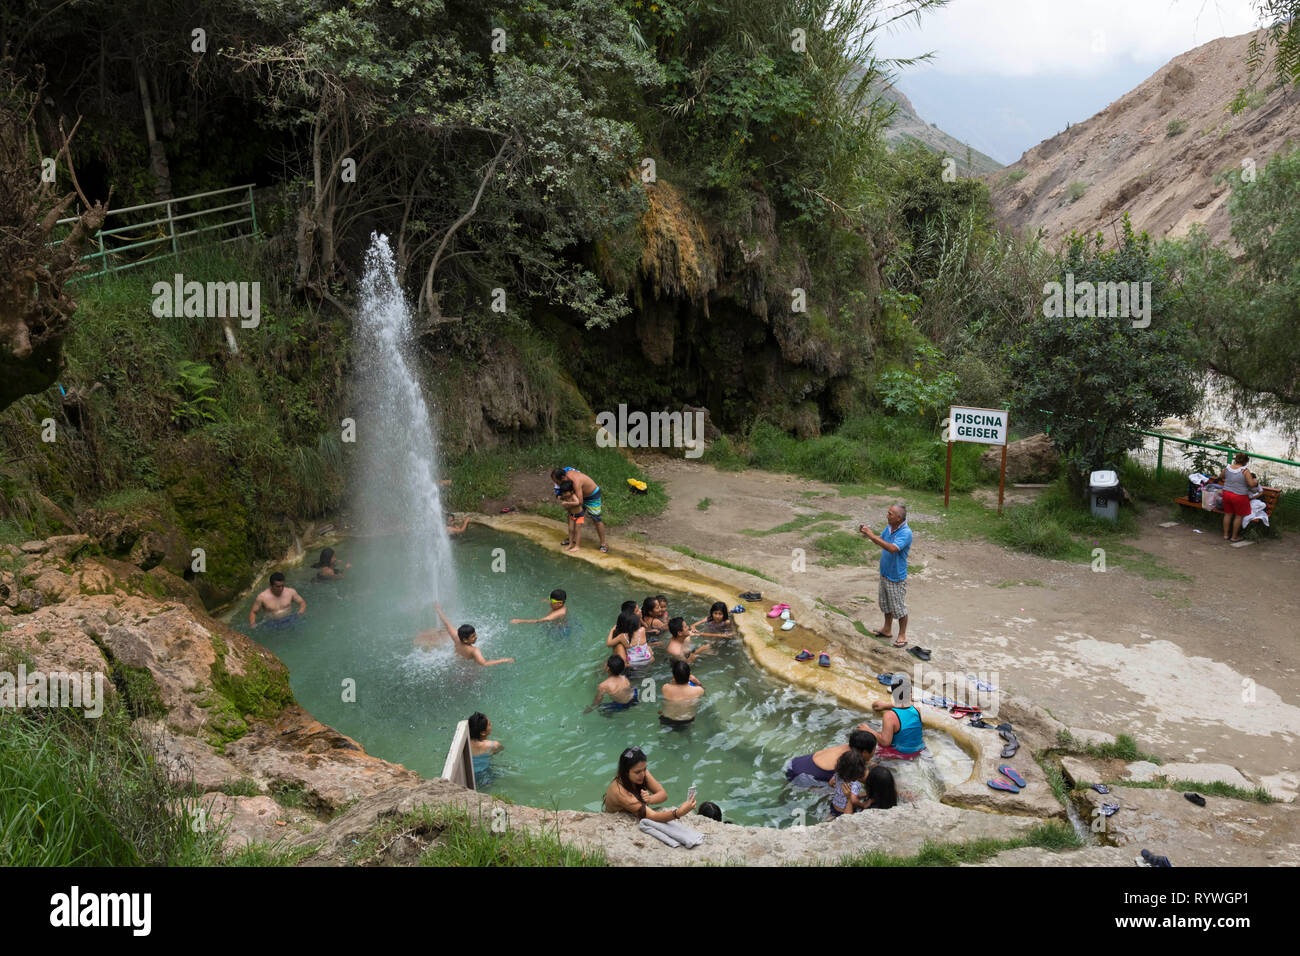 Churin, Lima. February 12, 2019 - Unknown people enjoying a day of relaxation in the natural hot spring pool of Churin, Lima Stock Photo